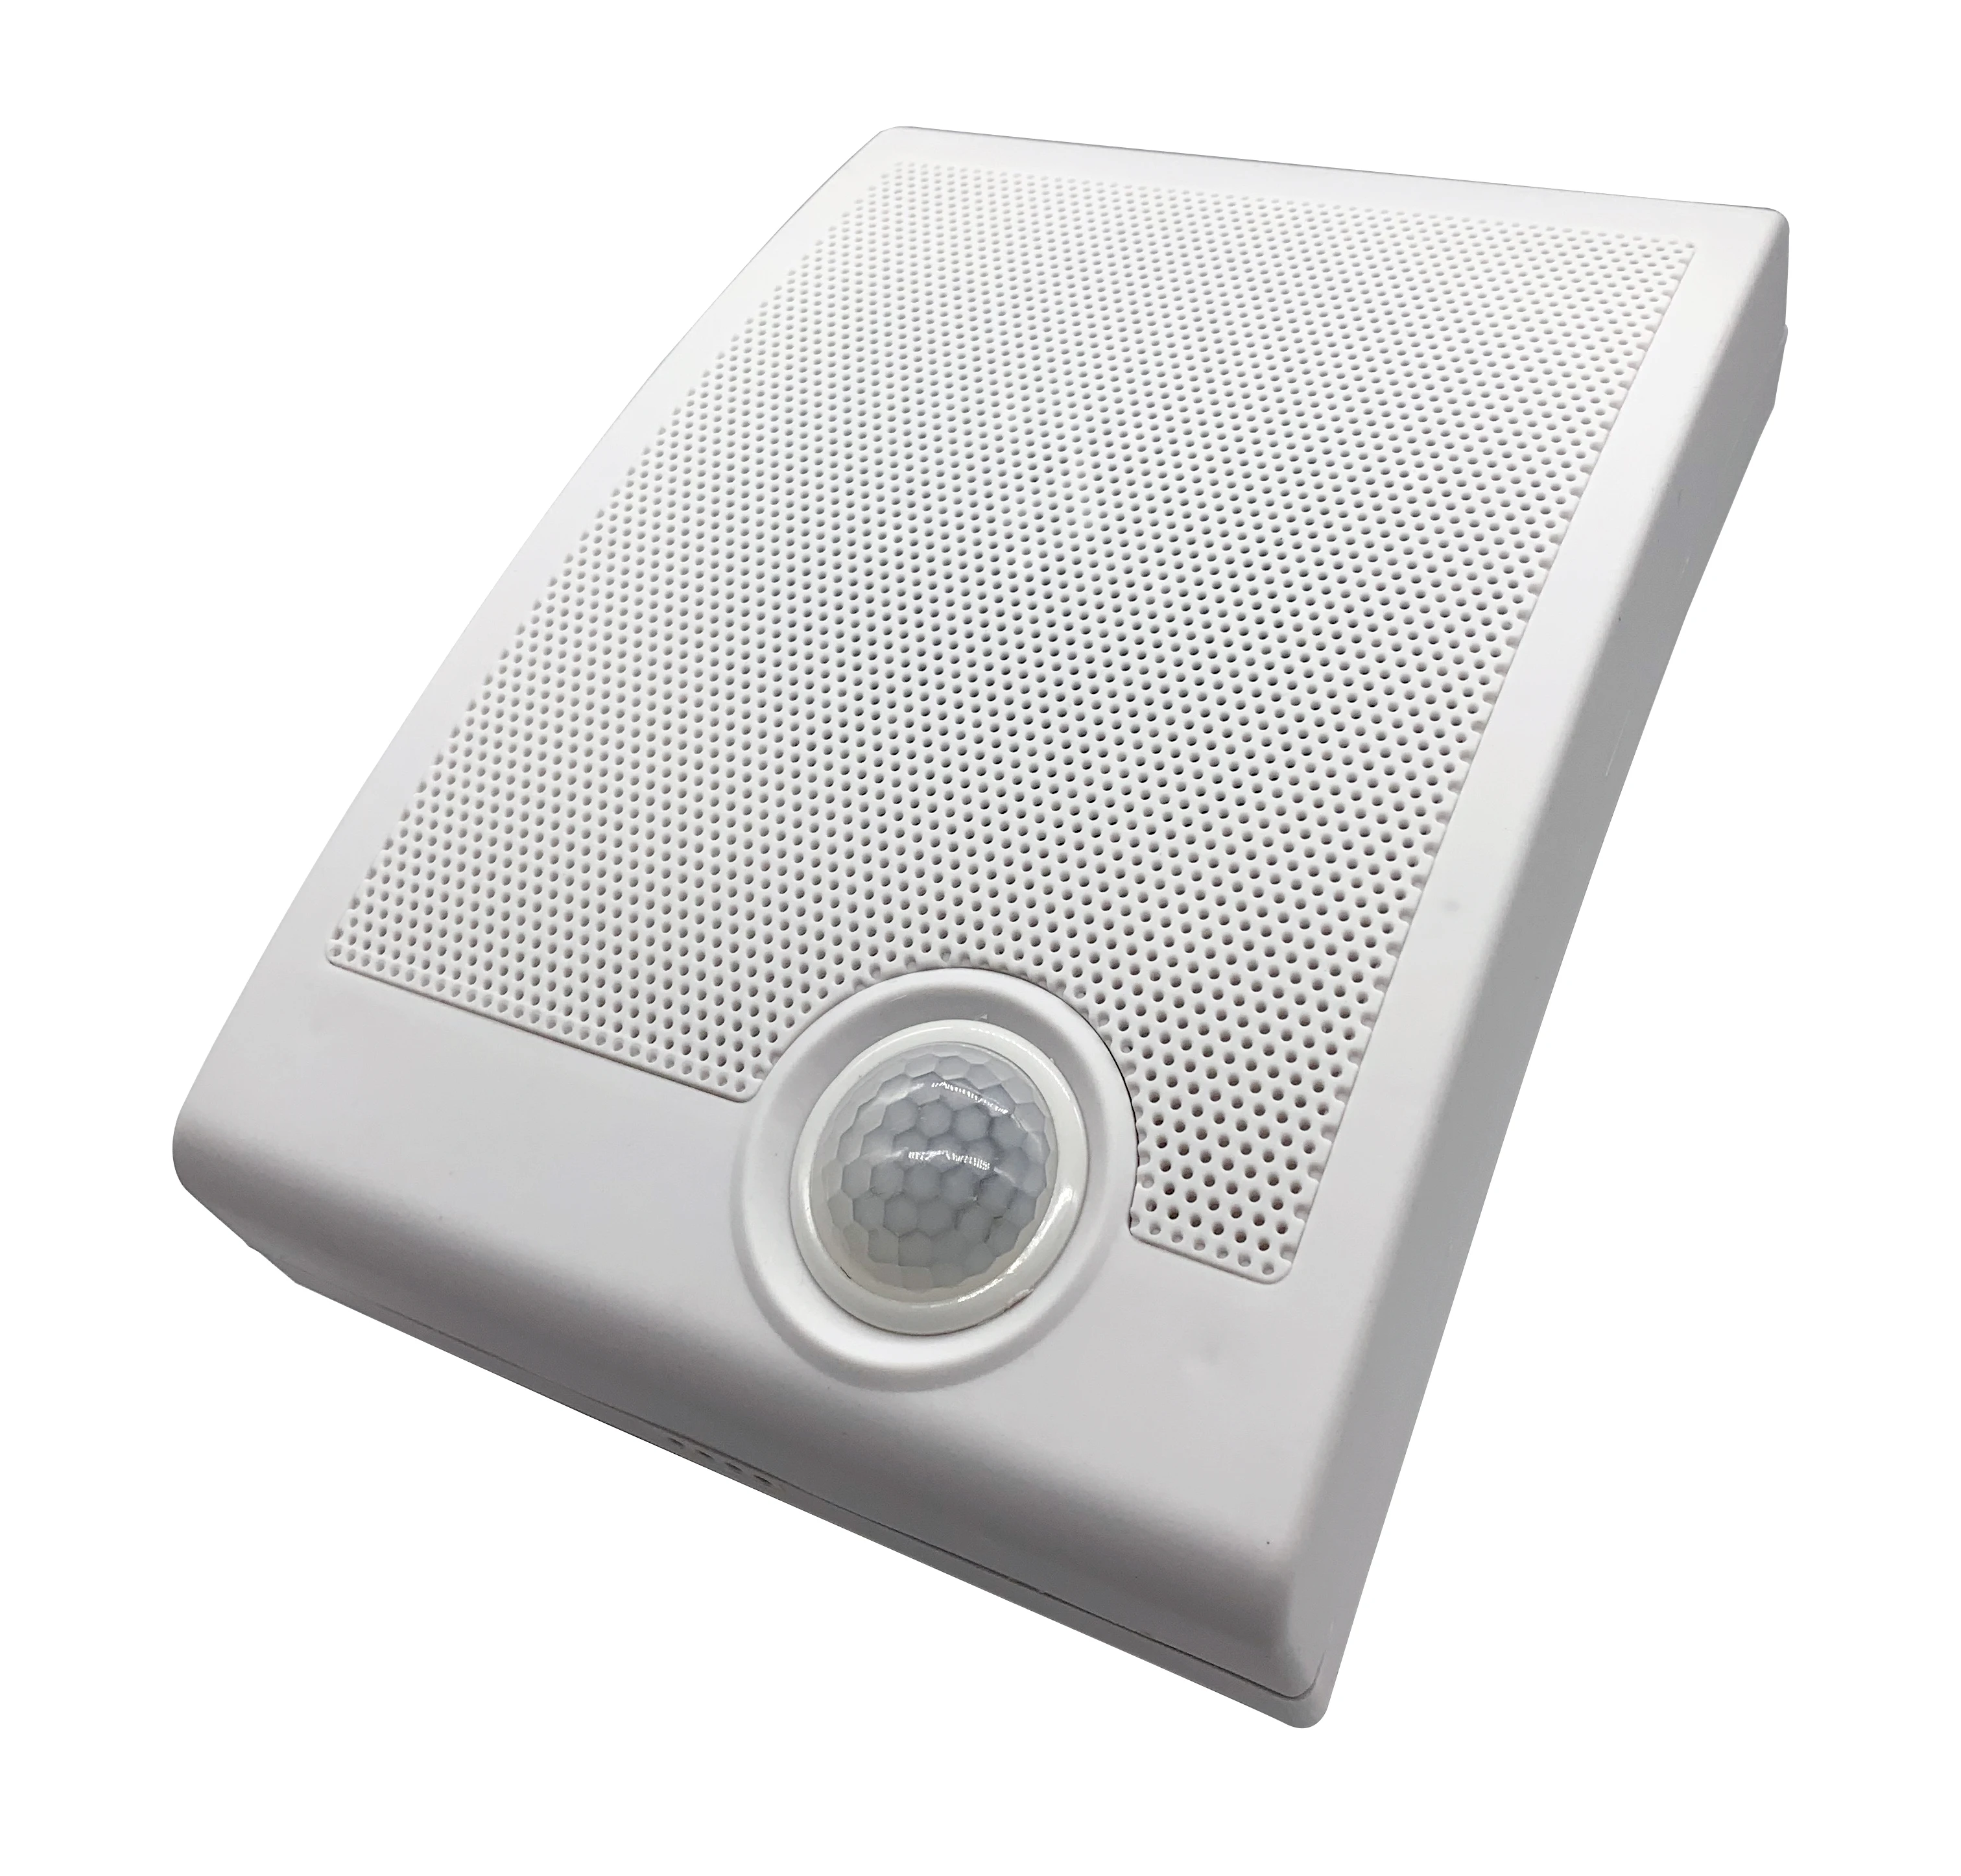 JRSN001 20w Outdoor rainproof Infrared Induction Wall Mounted Speaker for Door Greeting Welcome